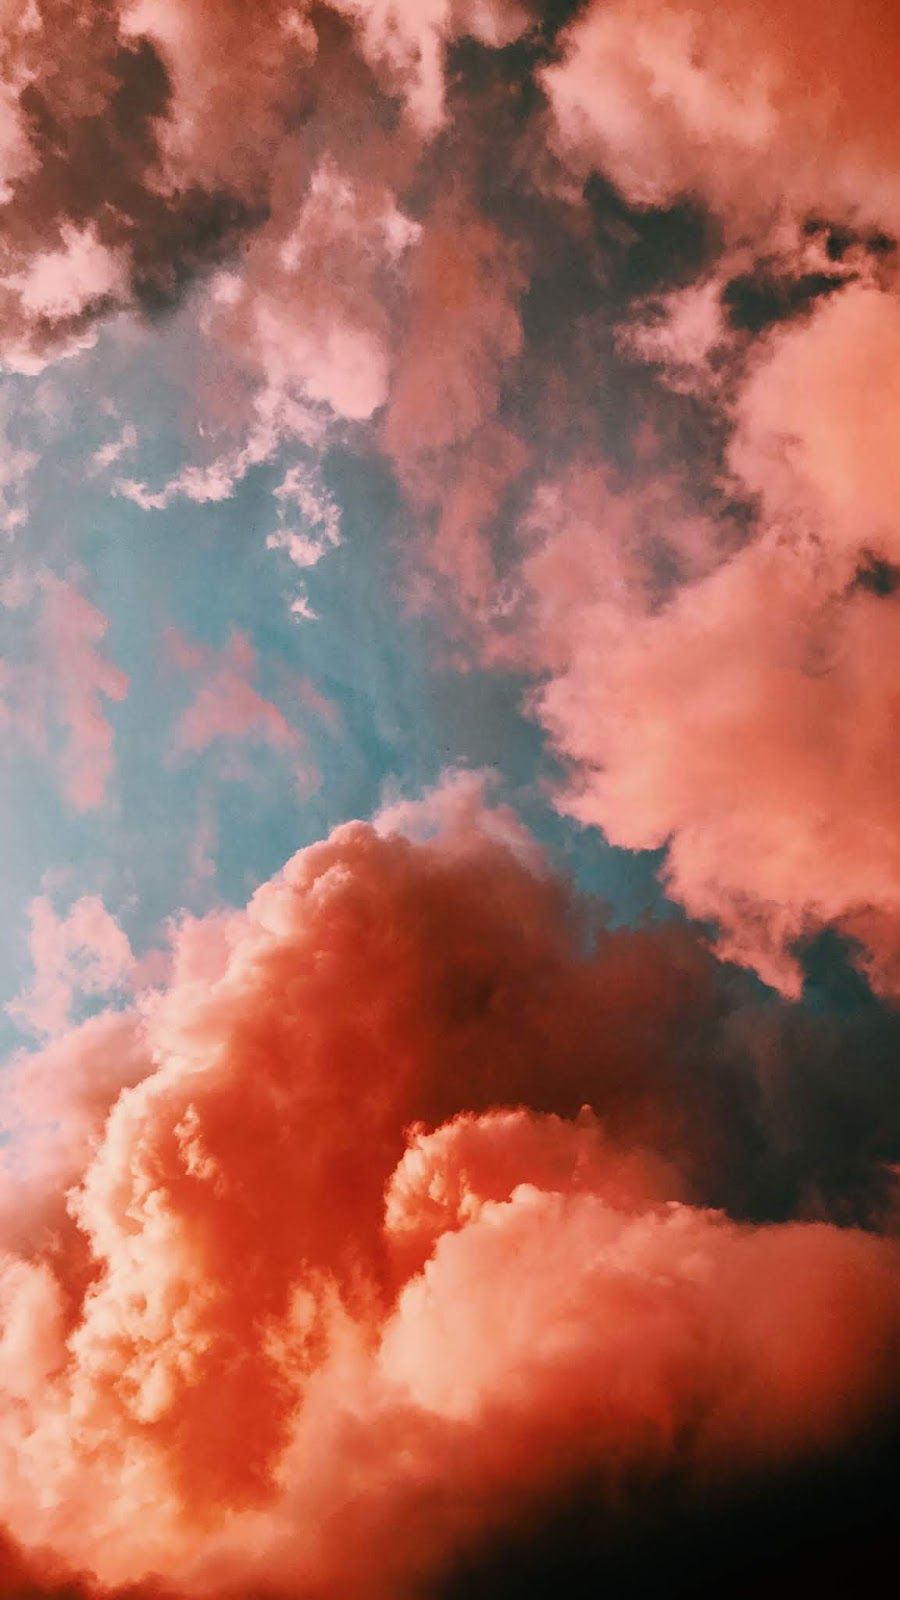 Clouds #wallpaper #iphone #android #background #followme. Clouds wallpaper iphone, Sky aesthetic, Cloud wallpaper